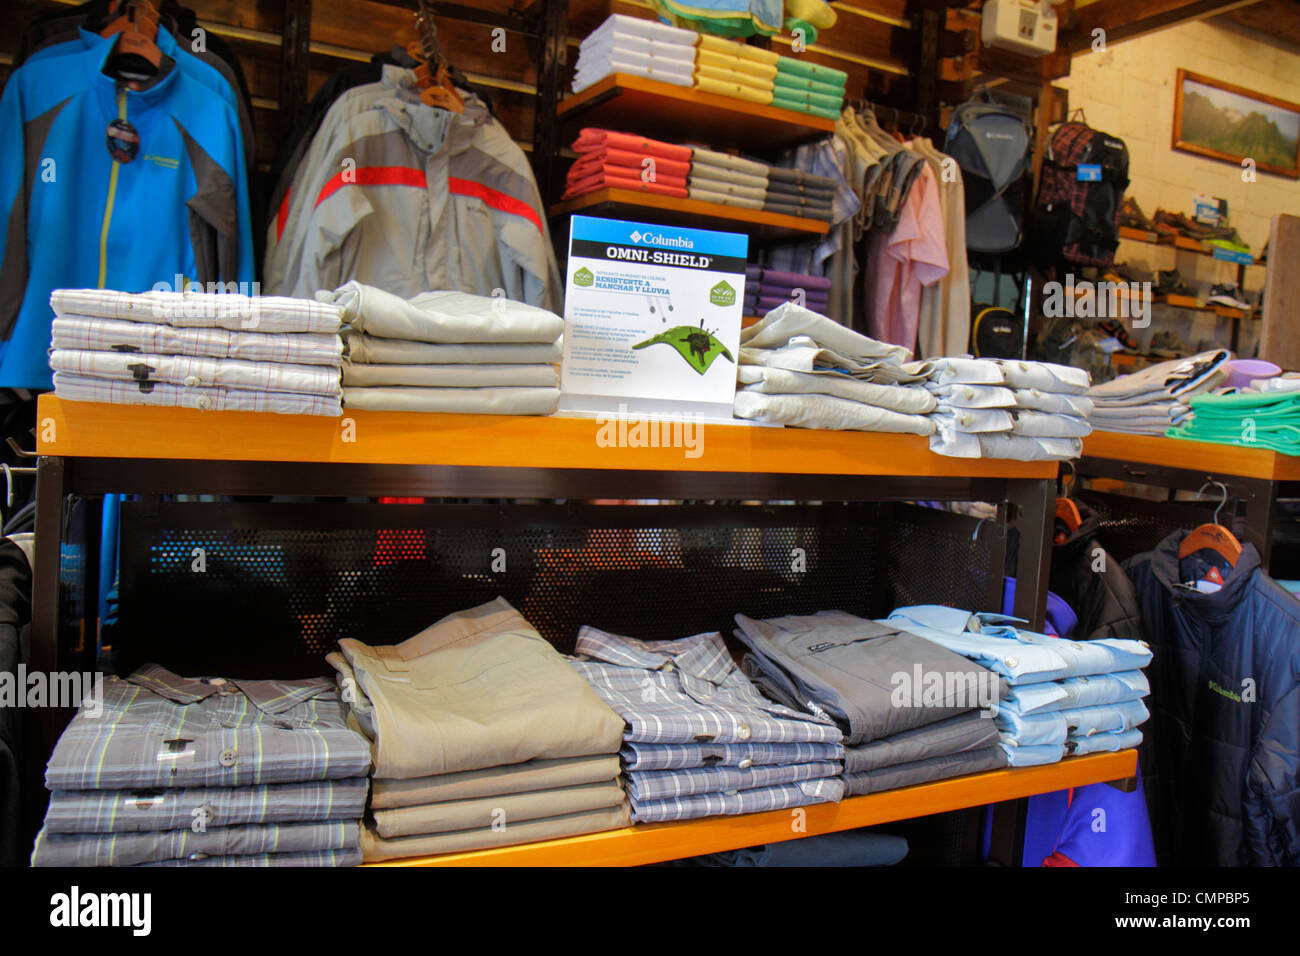 Columbia sportswear shop hi-res stock photography and images - Alamy